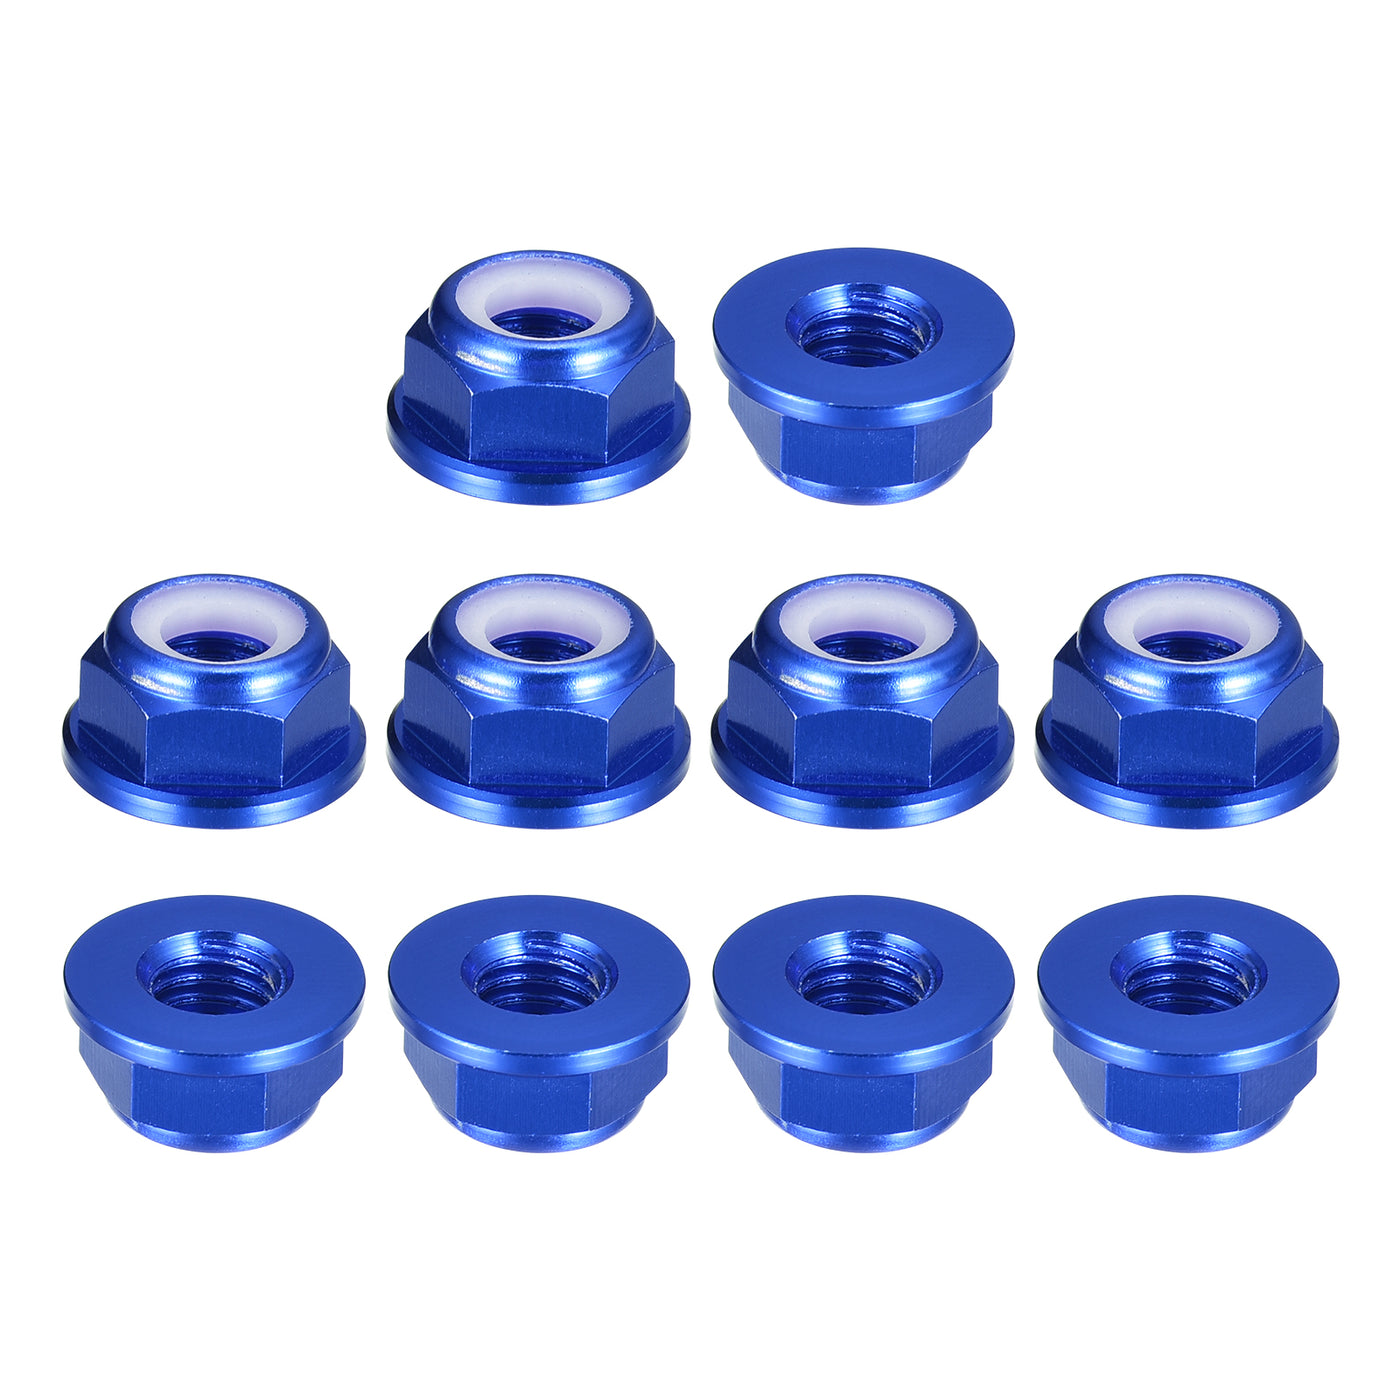 uxcell Uxcell Nylon Insert Hex Lock Nuts, 10pcs - M6 x 1mm Aluminum Alloy Self-Locking Nut, Anodizing Flange Lock Nut for Fasteners (Sapphire Blue)